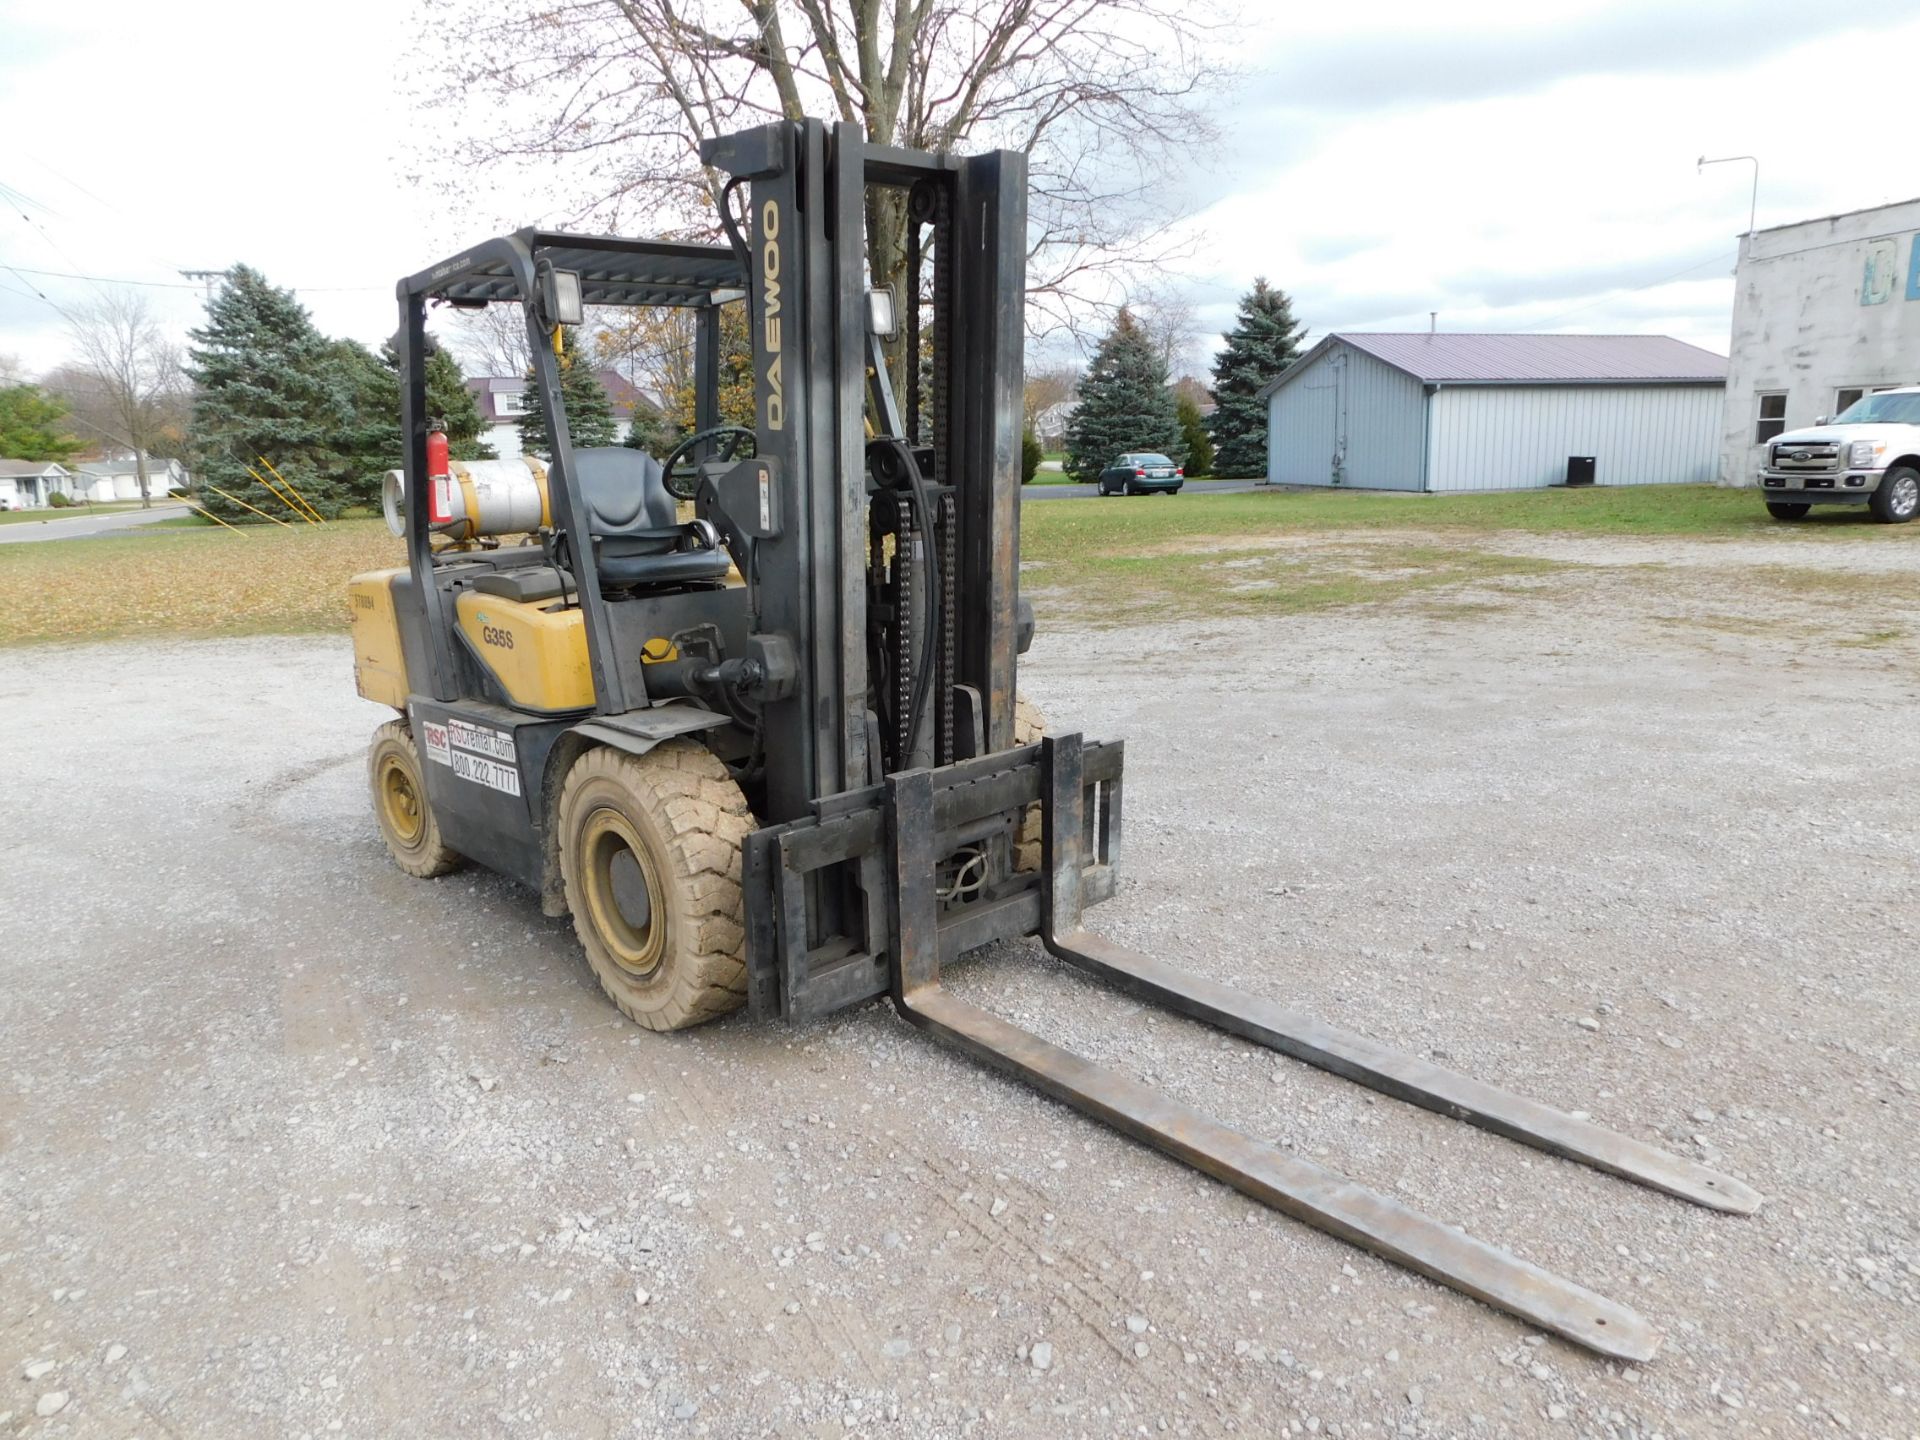 Daewoo Model G35S-2 Forklift, SN G2-00191, 6,700 lb. cap., LP, Solid Pneumatic Non-Marking Tires, - Image 8 of 20